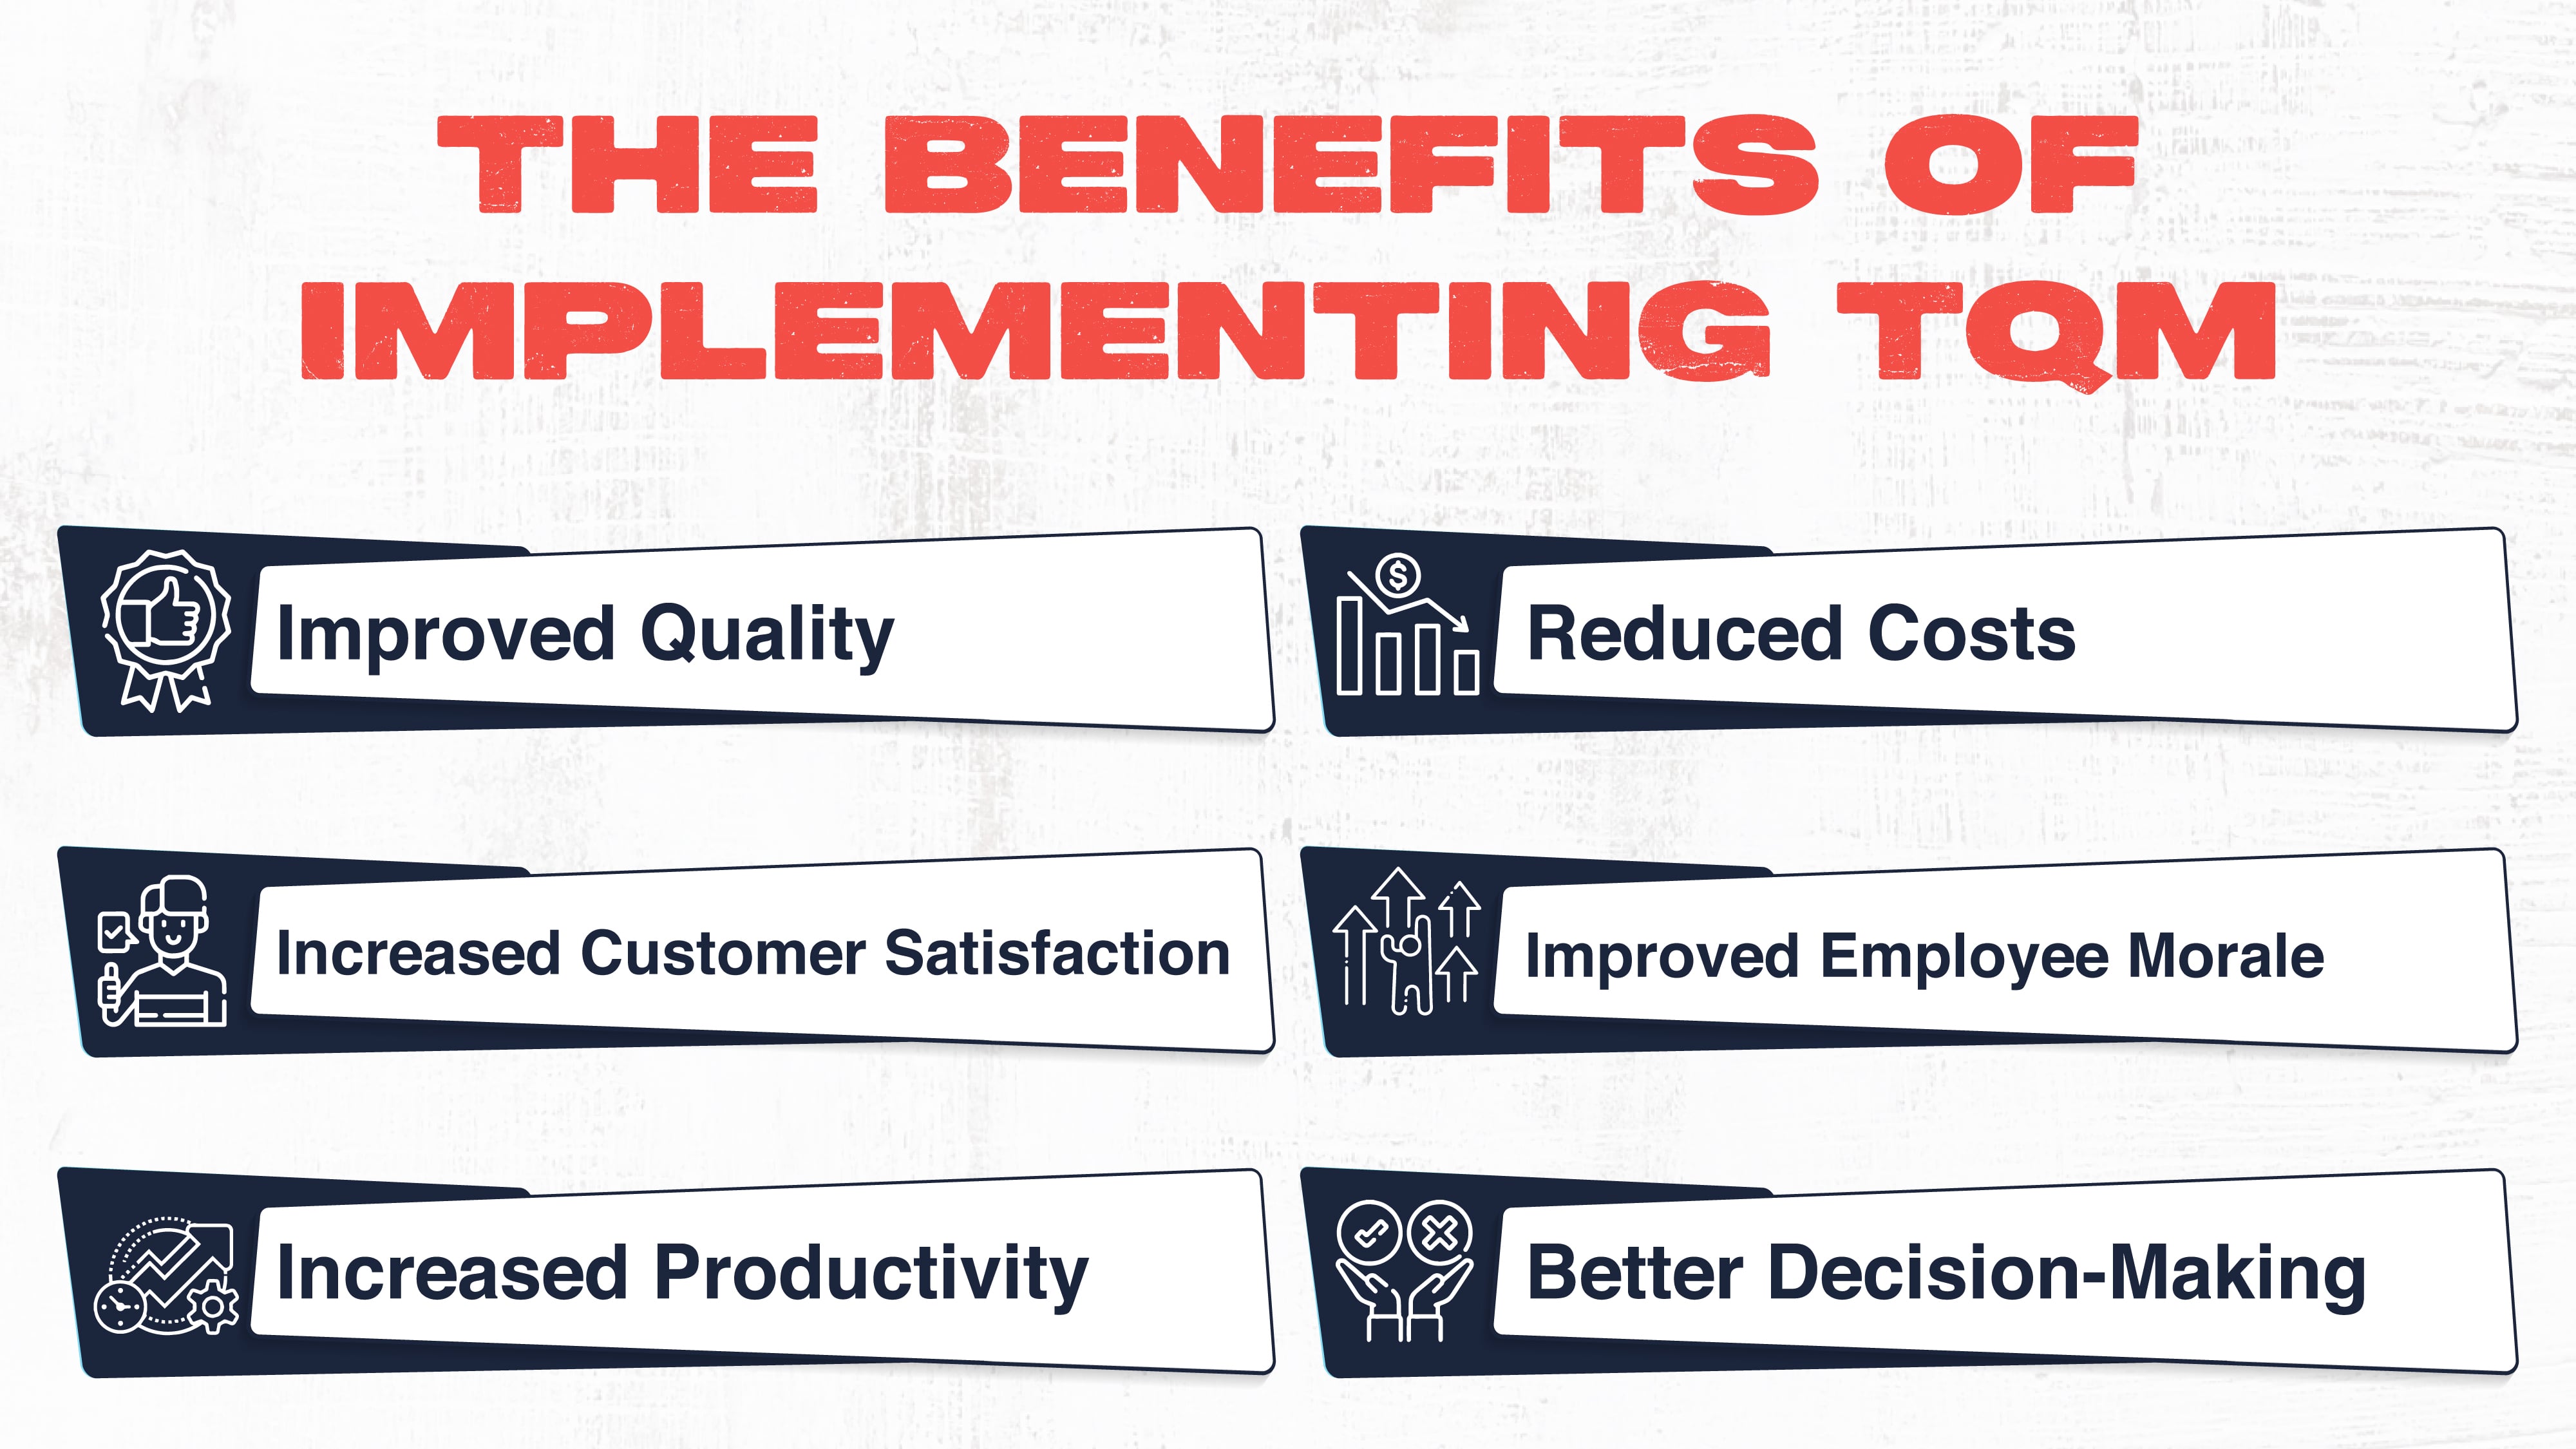 THE BENEFITS OF IMPLEMENTING TQM